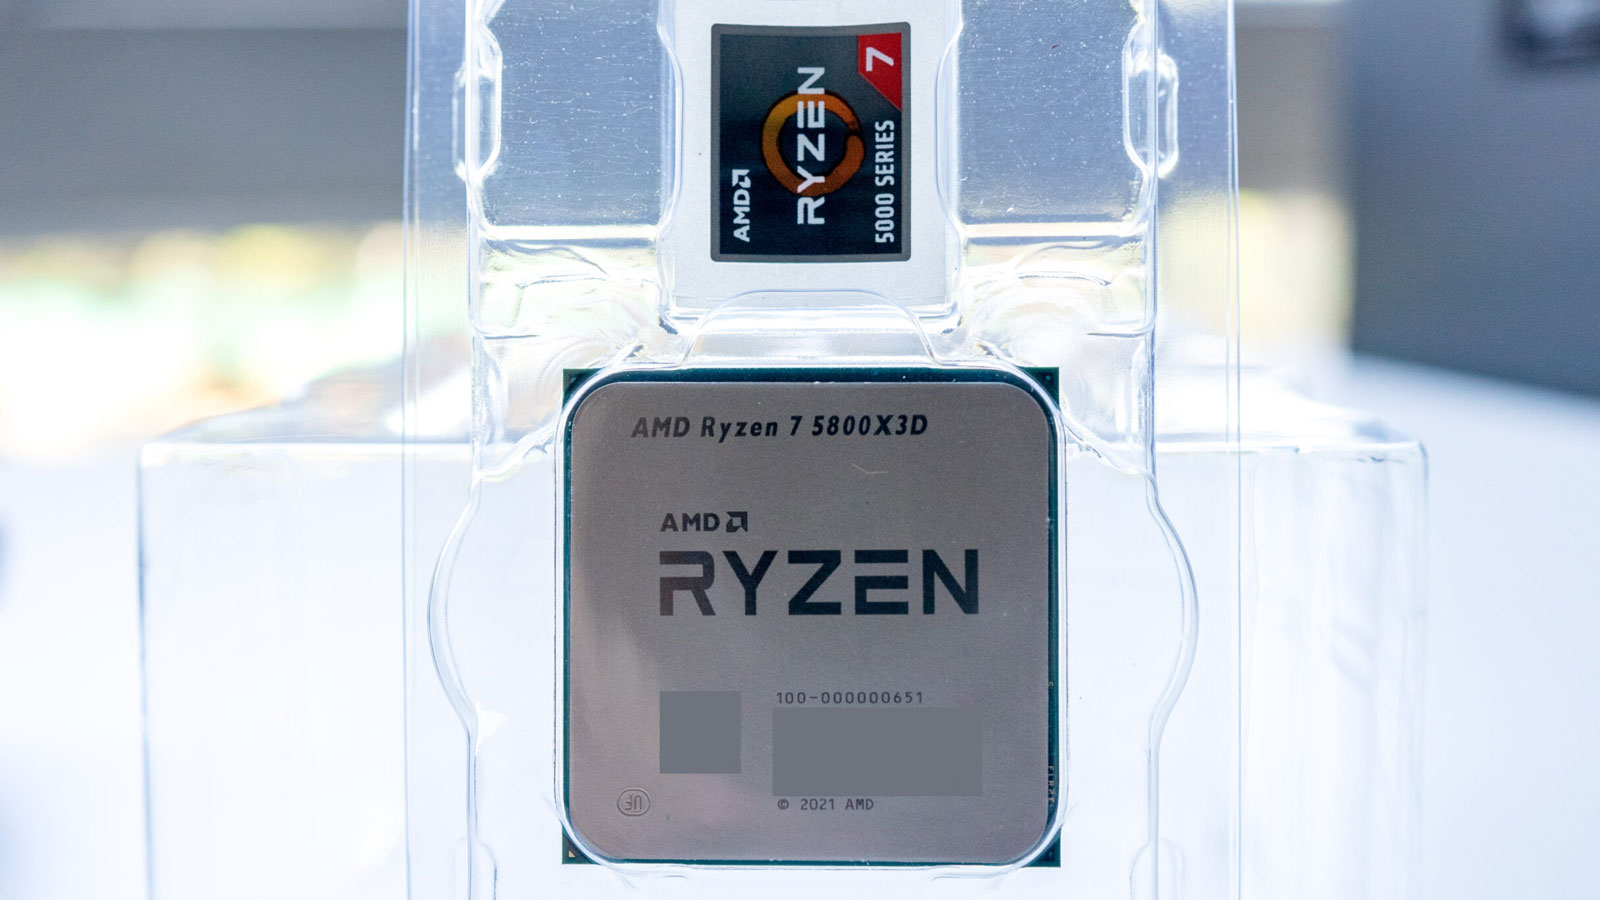 AMD Ryzen 7 5800X3D Put Through Rendering and Synthetic Benchmarks